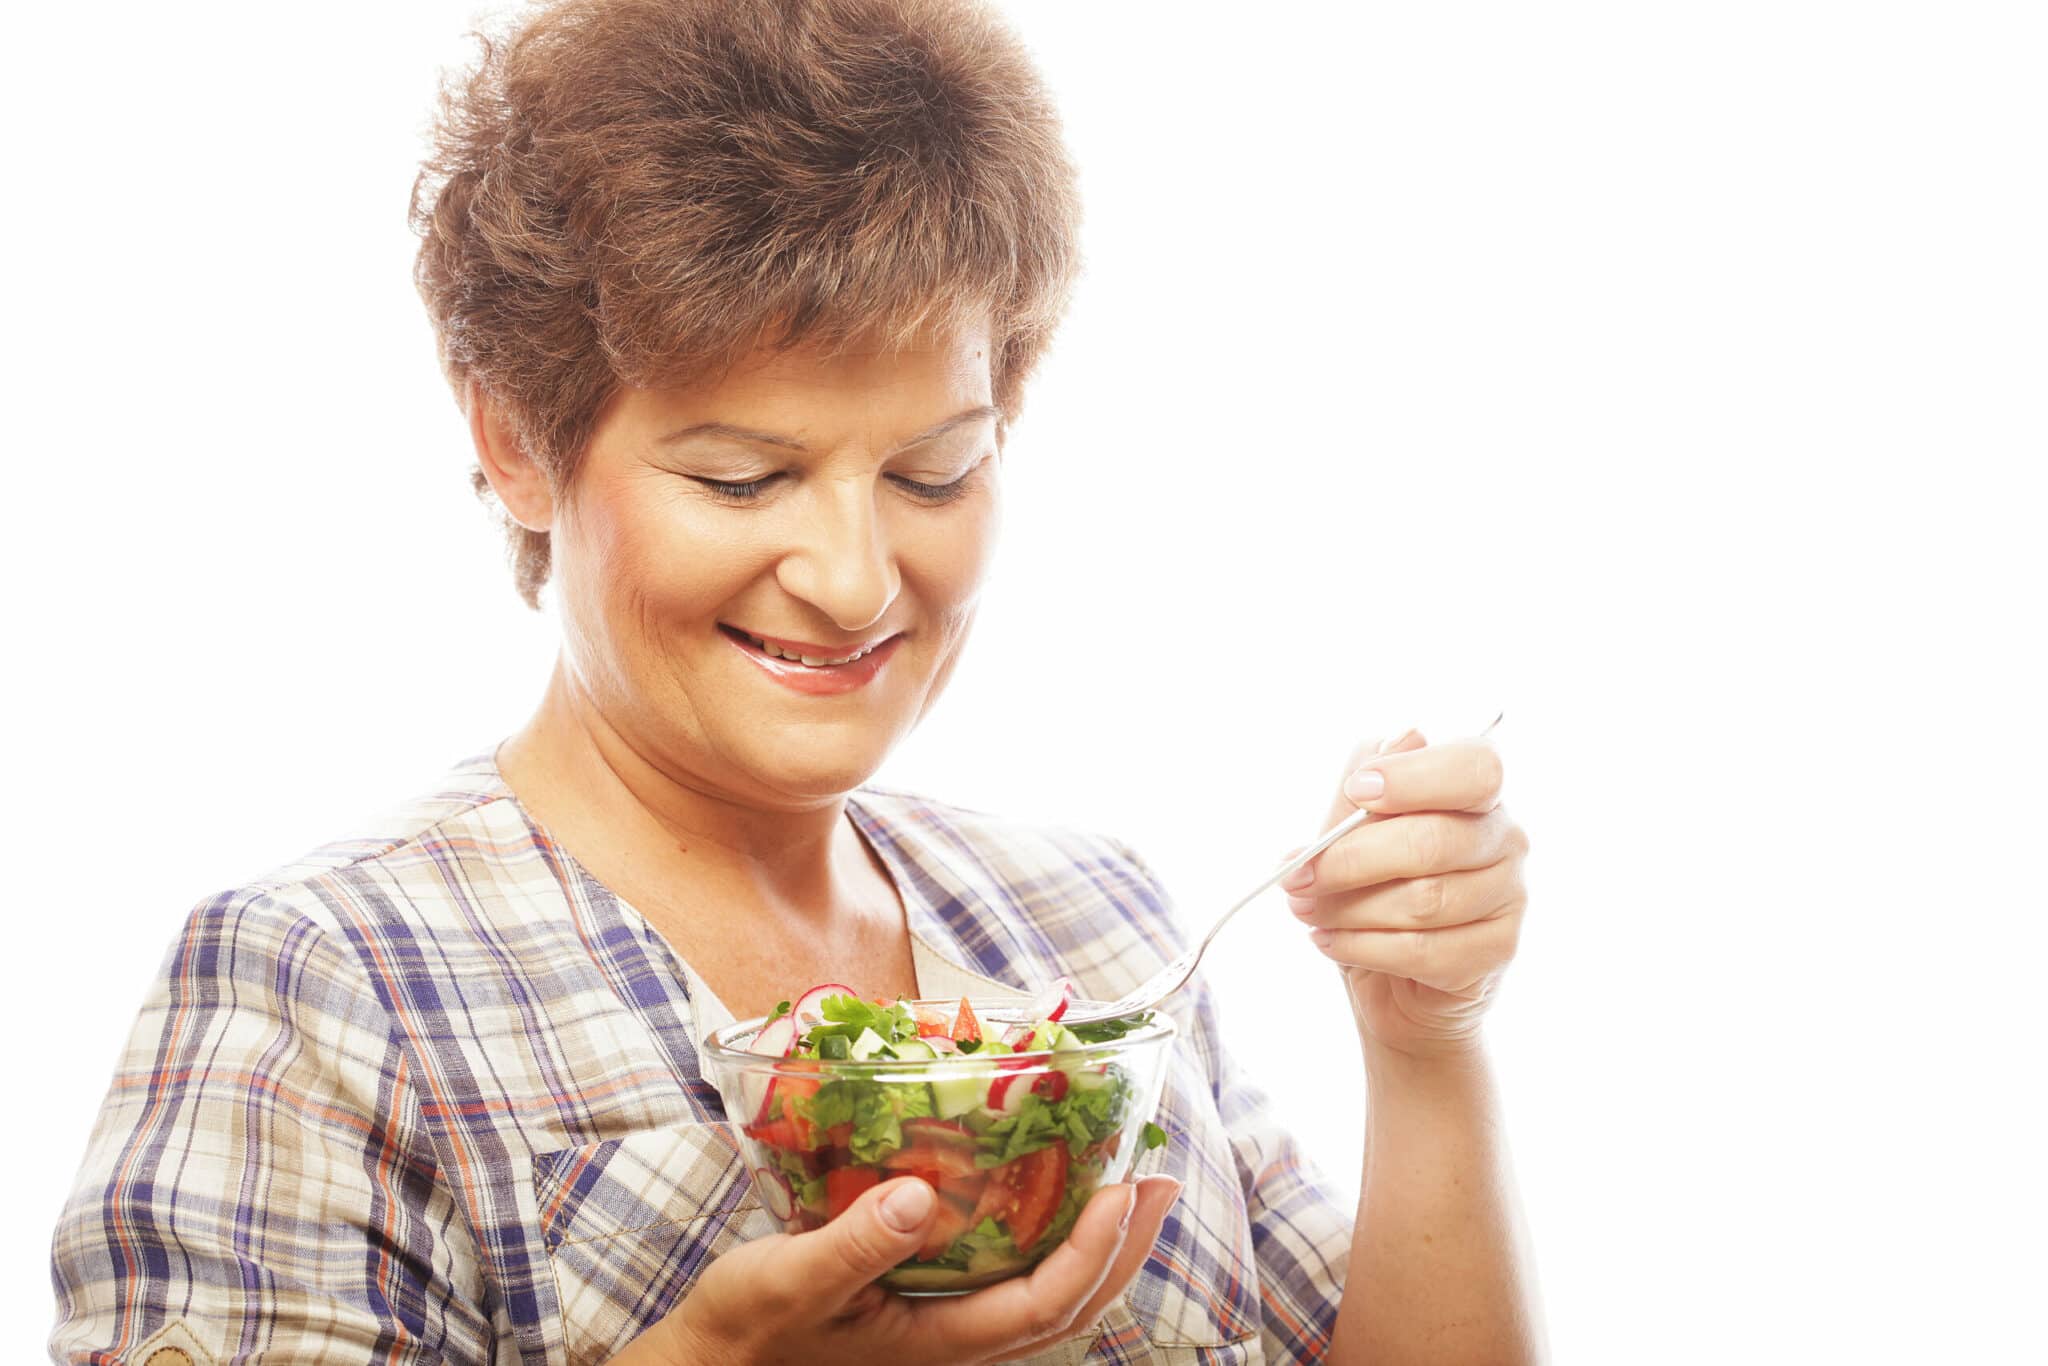 Sample Healthy Meal Plan For 50-Year-old Woman